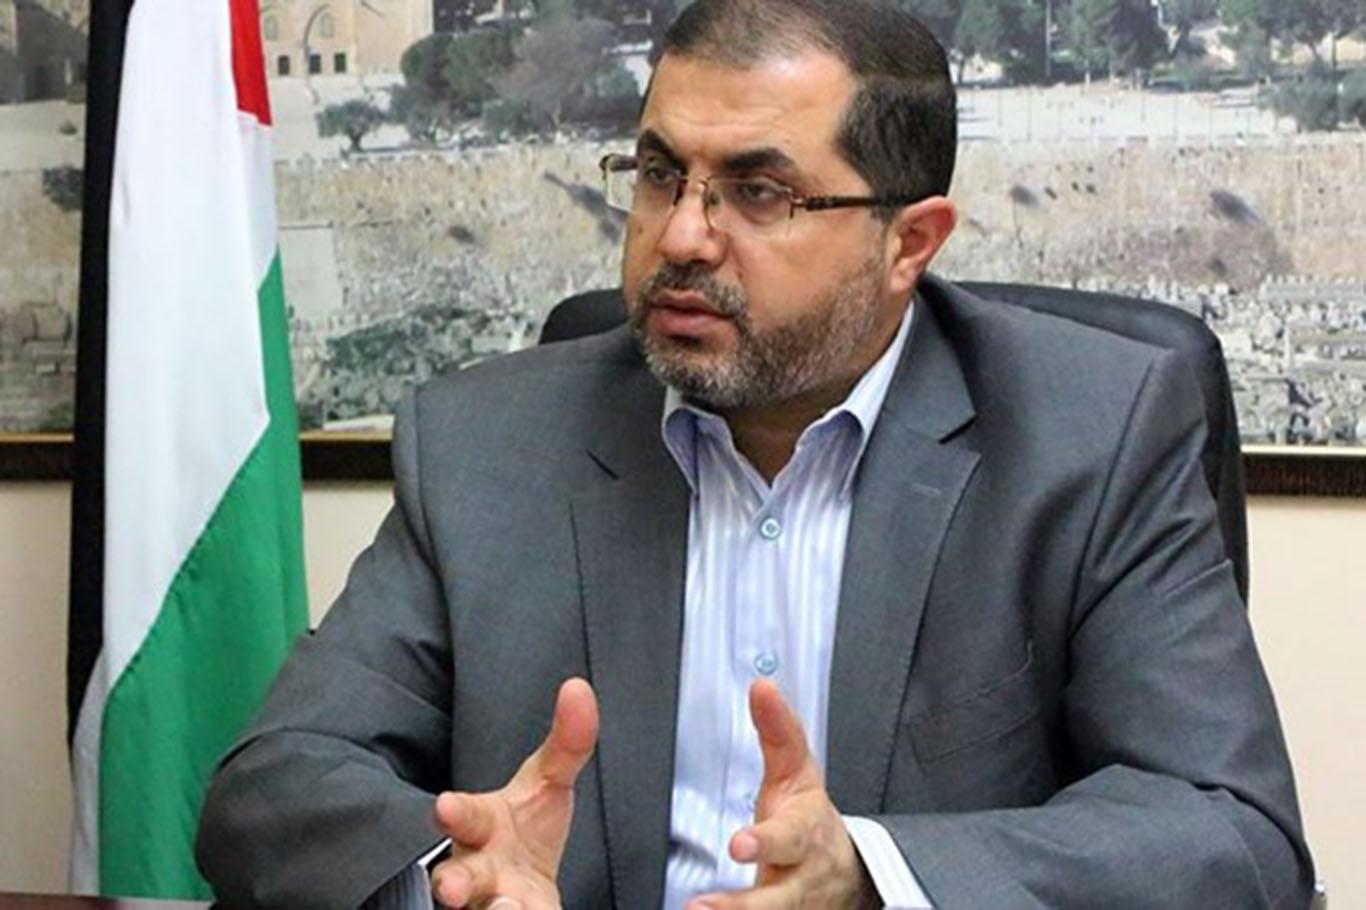 HAMAS welcomes UNESCO’s unanimous decisions in favor of Palestine